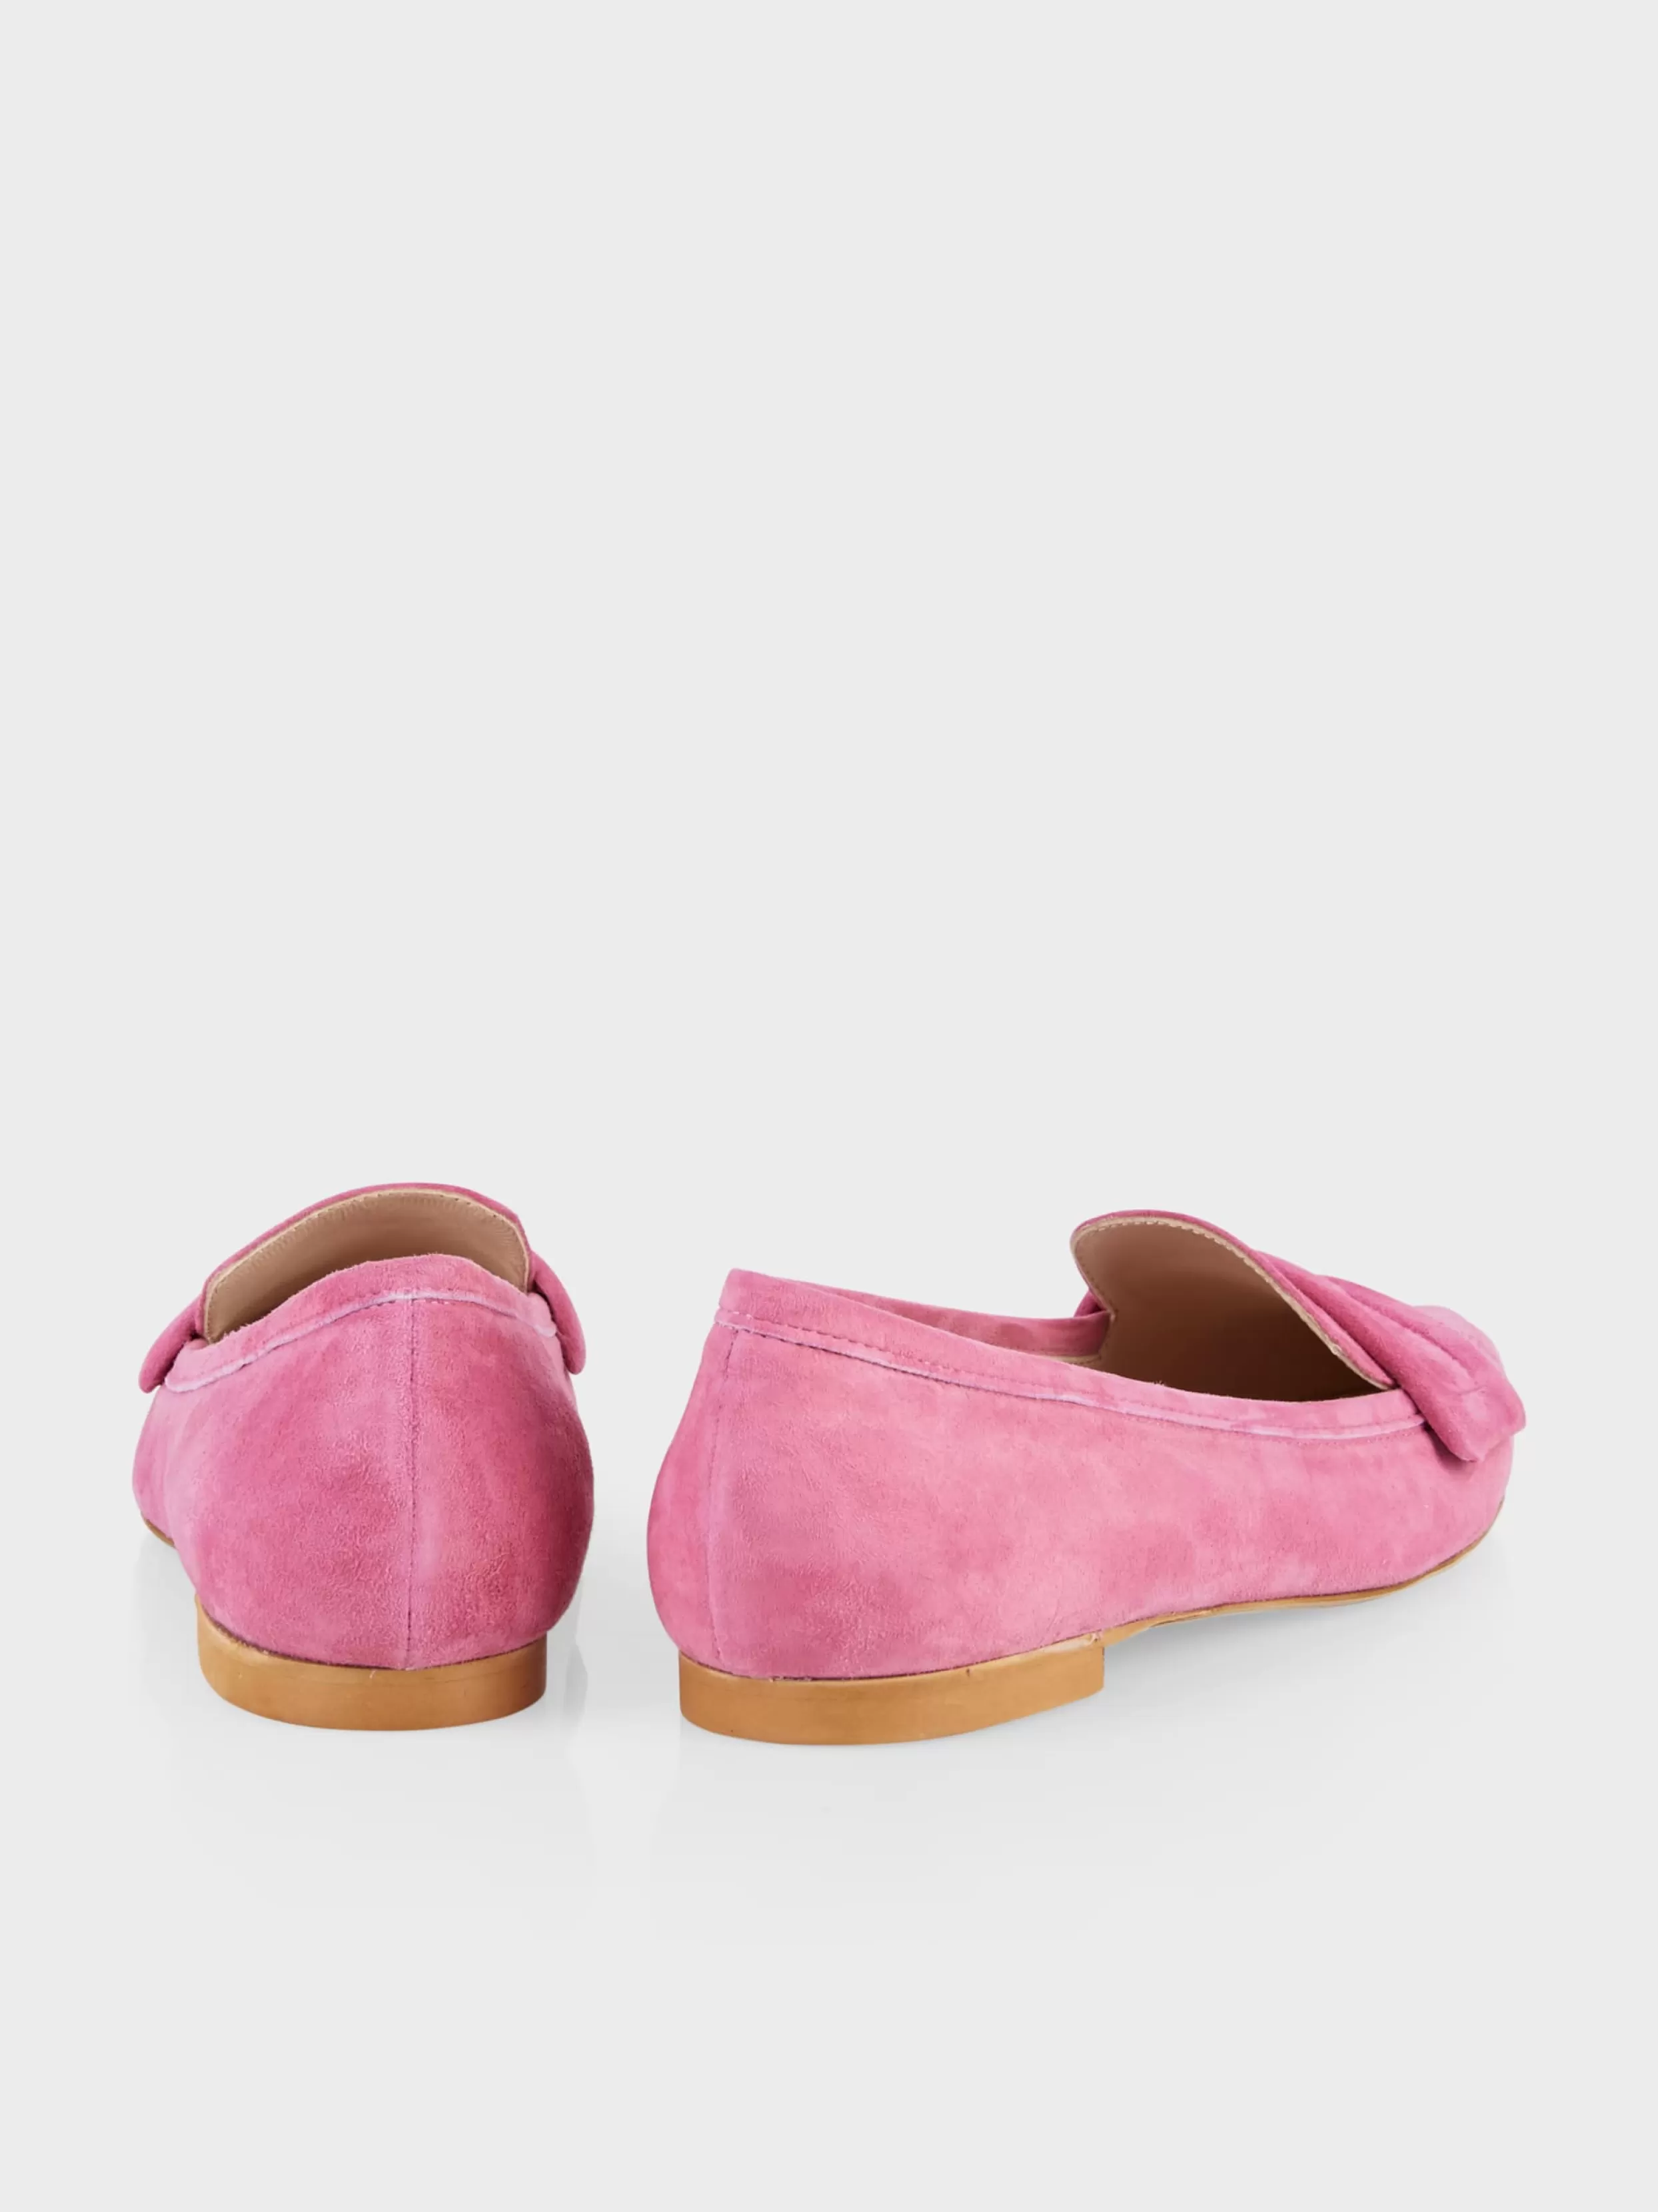 Marc Cain "Rethink Together" flat loafers | Shoes